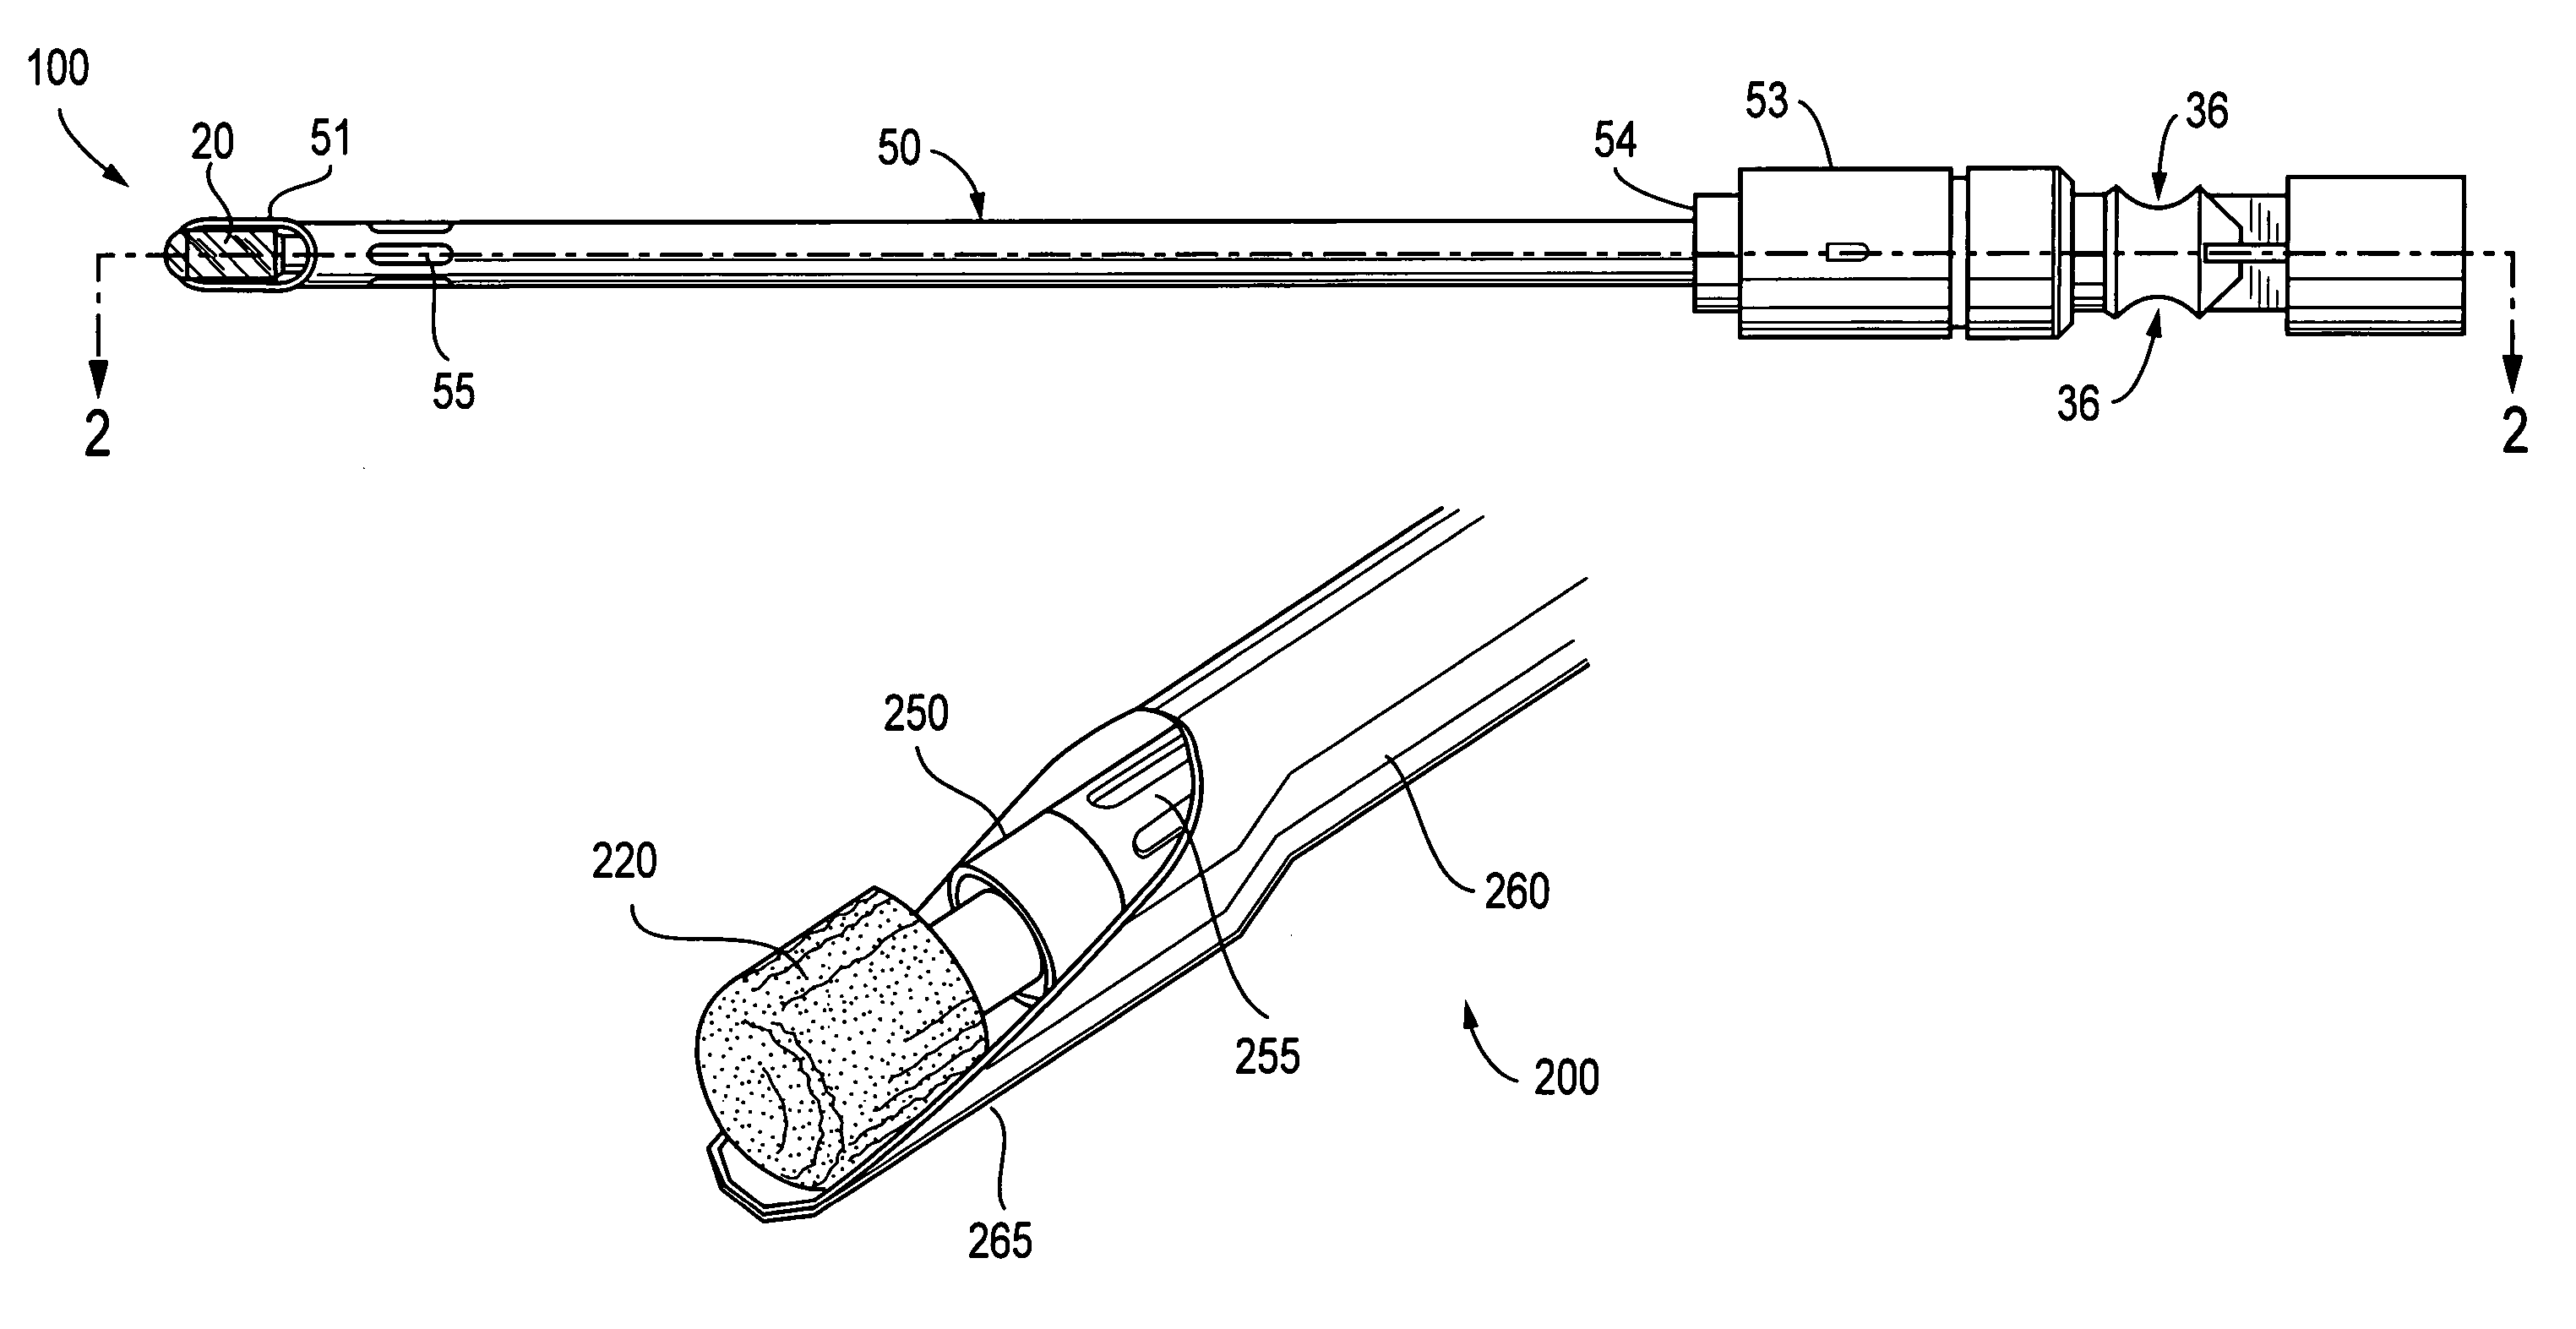 Surgical abrader with suction port proximal to bearing